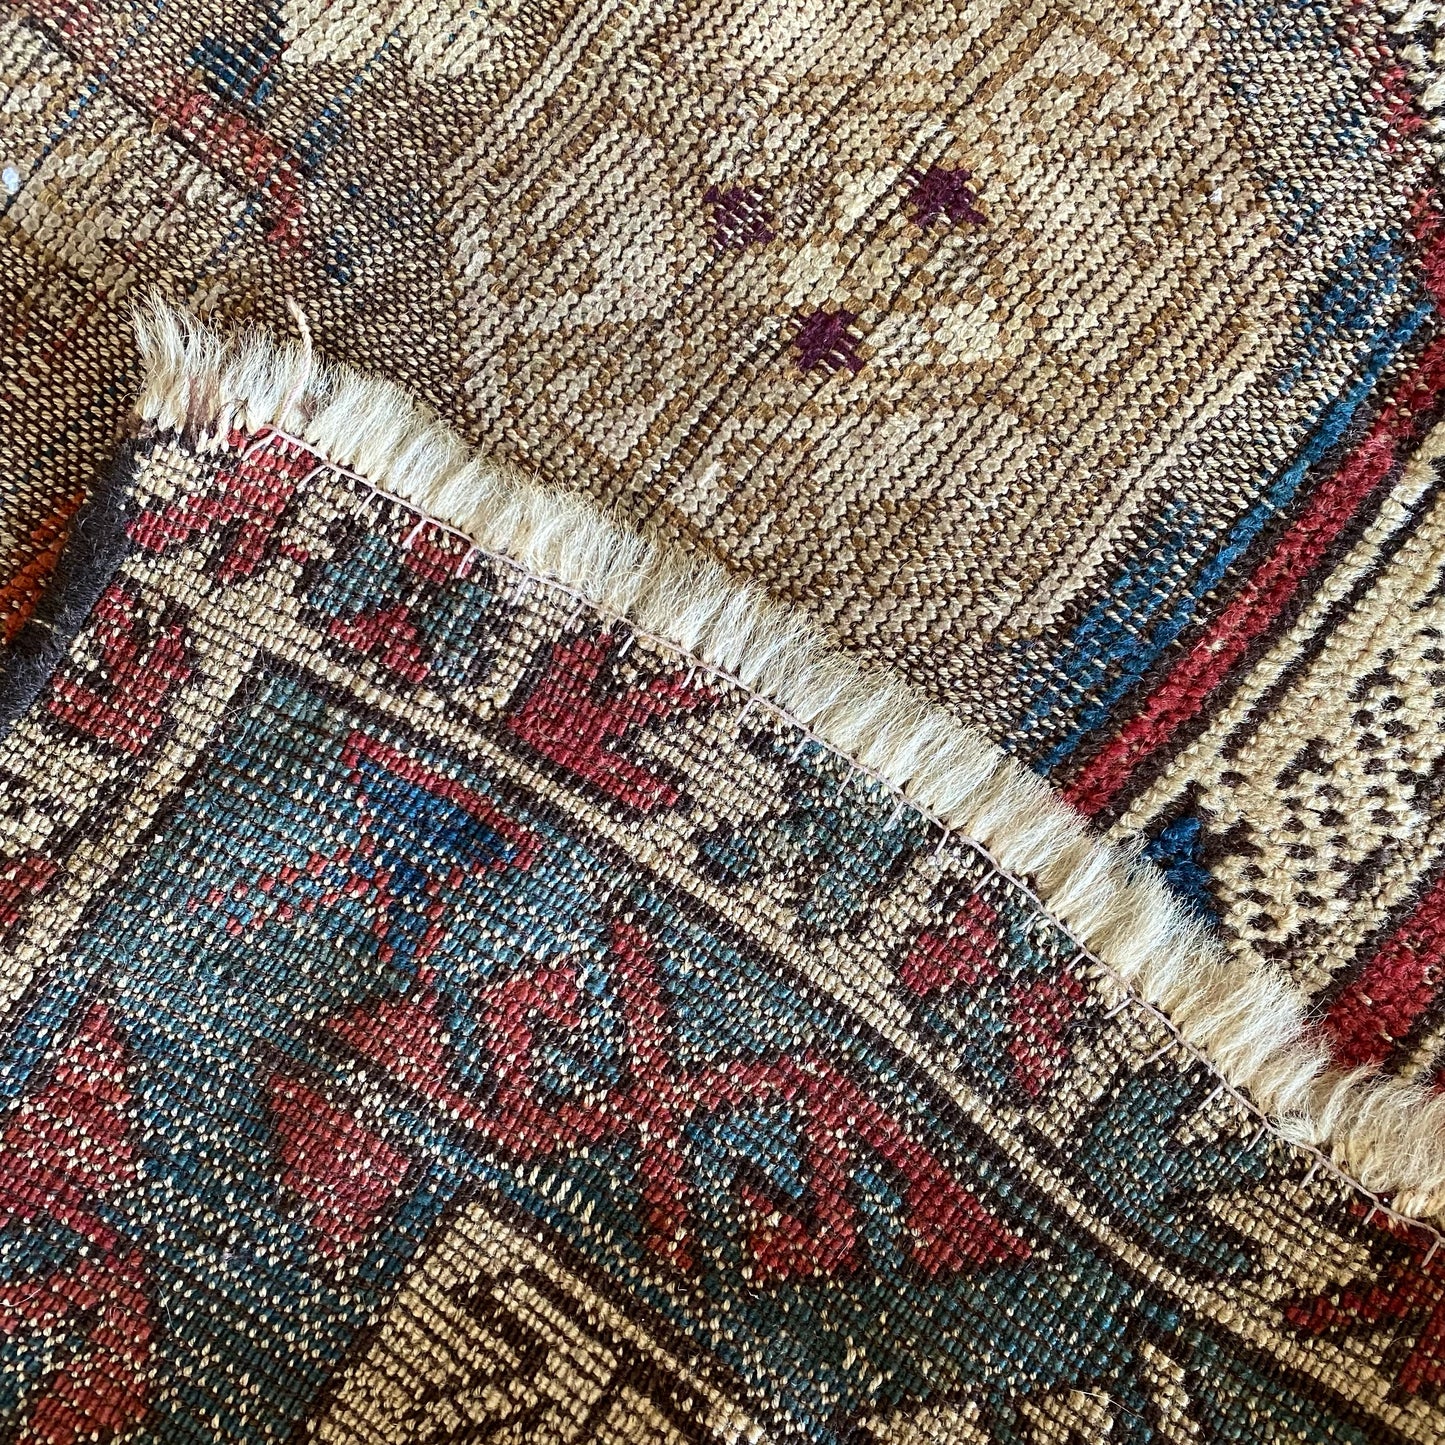 Antique Hand-knotted Persian Rug (7' 6" x 3' 7.75")